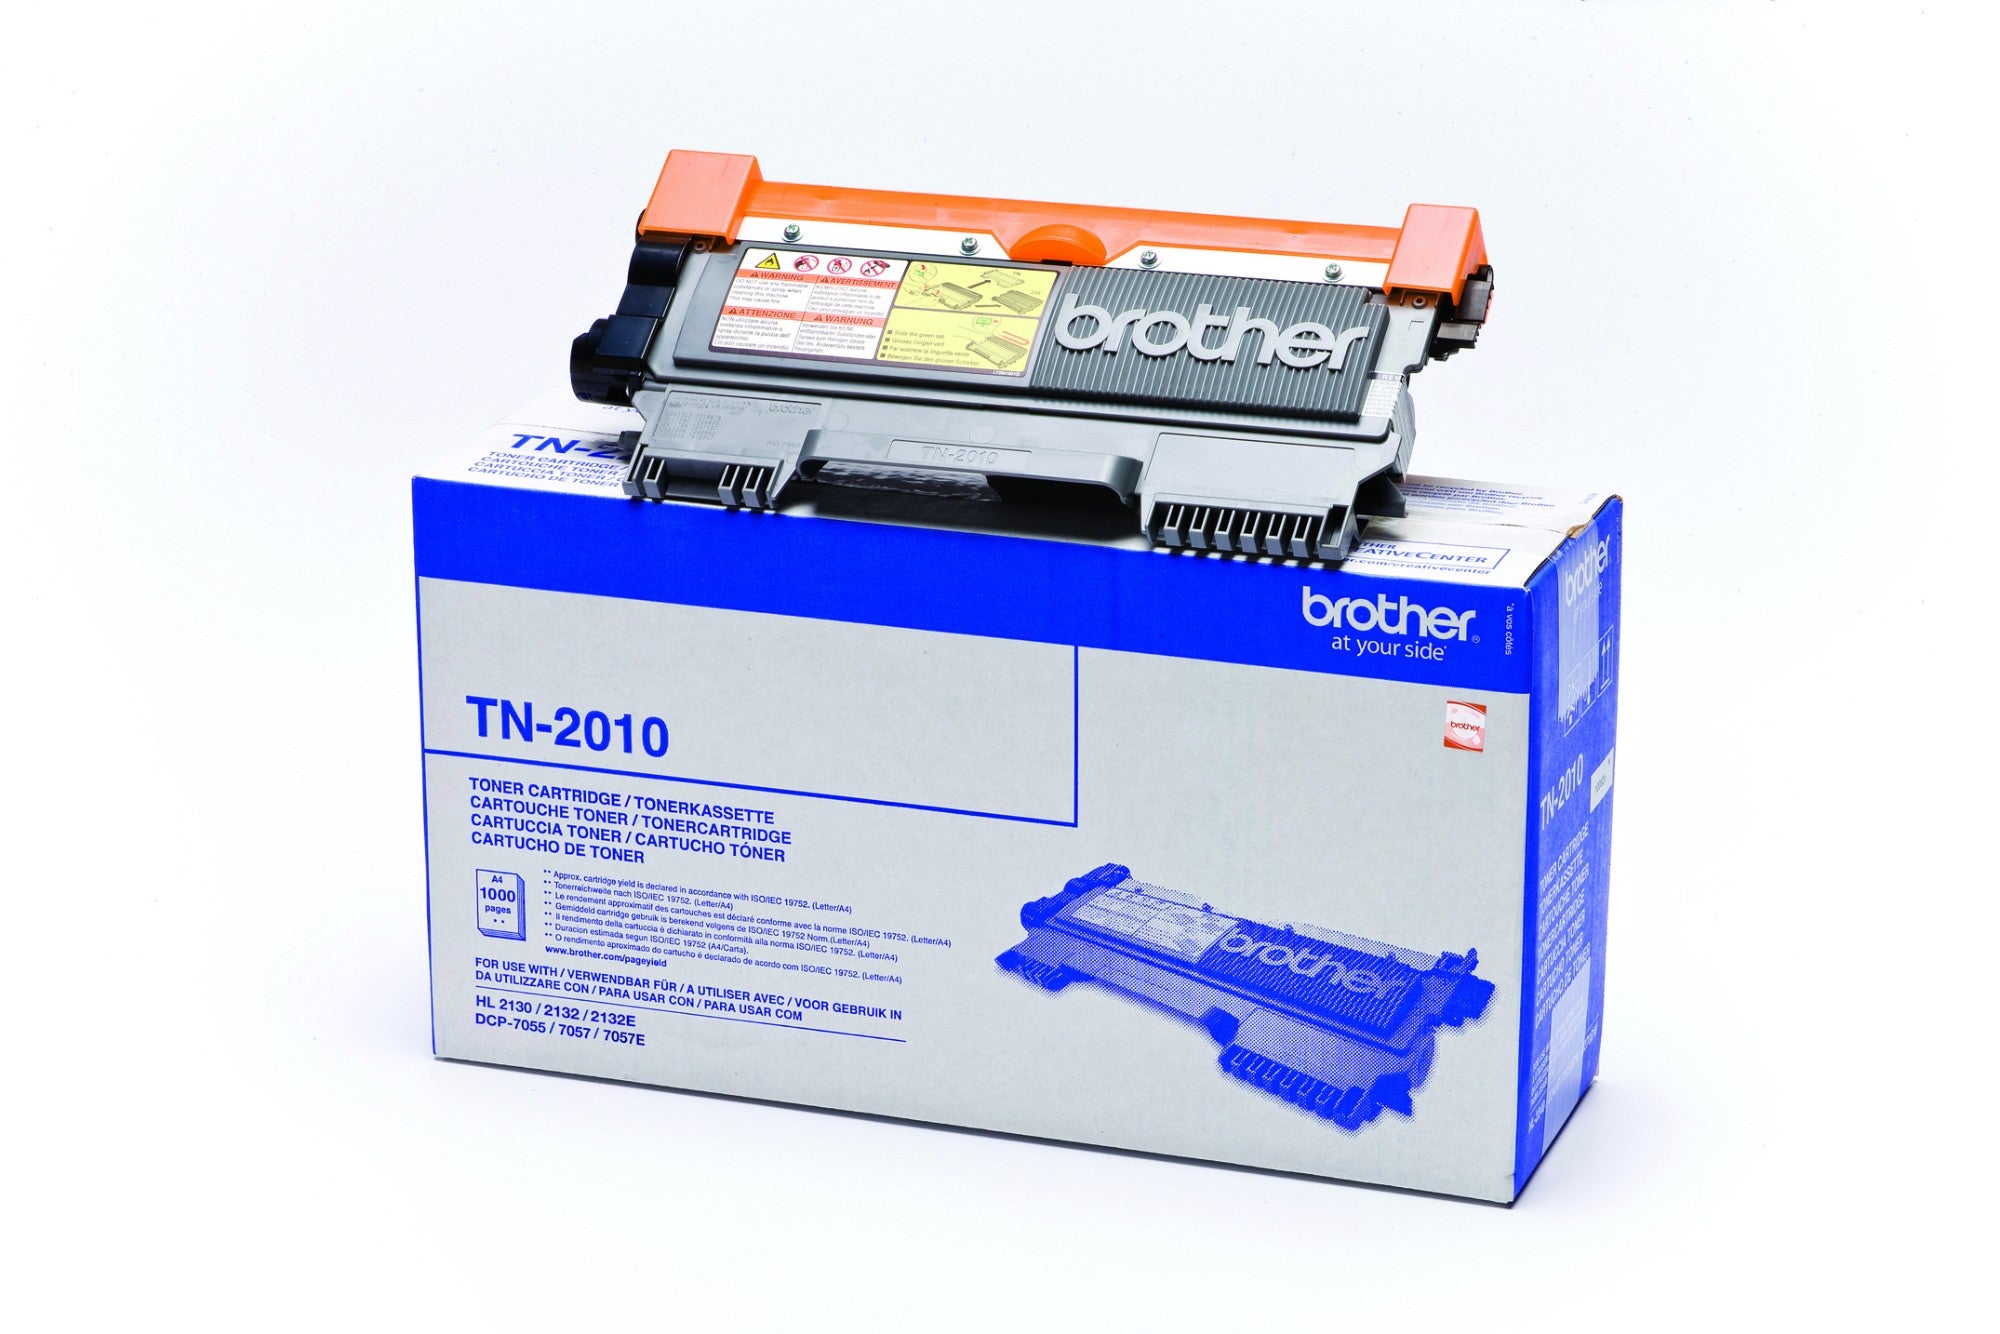 Brother Tn-2010 Toner-Kit, 1K Pages Isoiec 19752 For Brother Hl-2130-(TN2010)